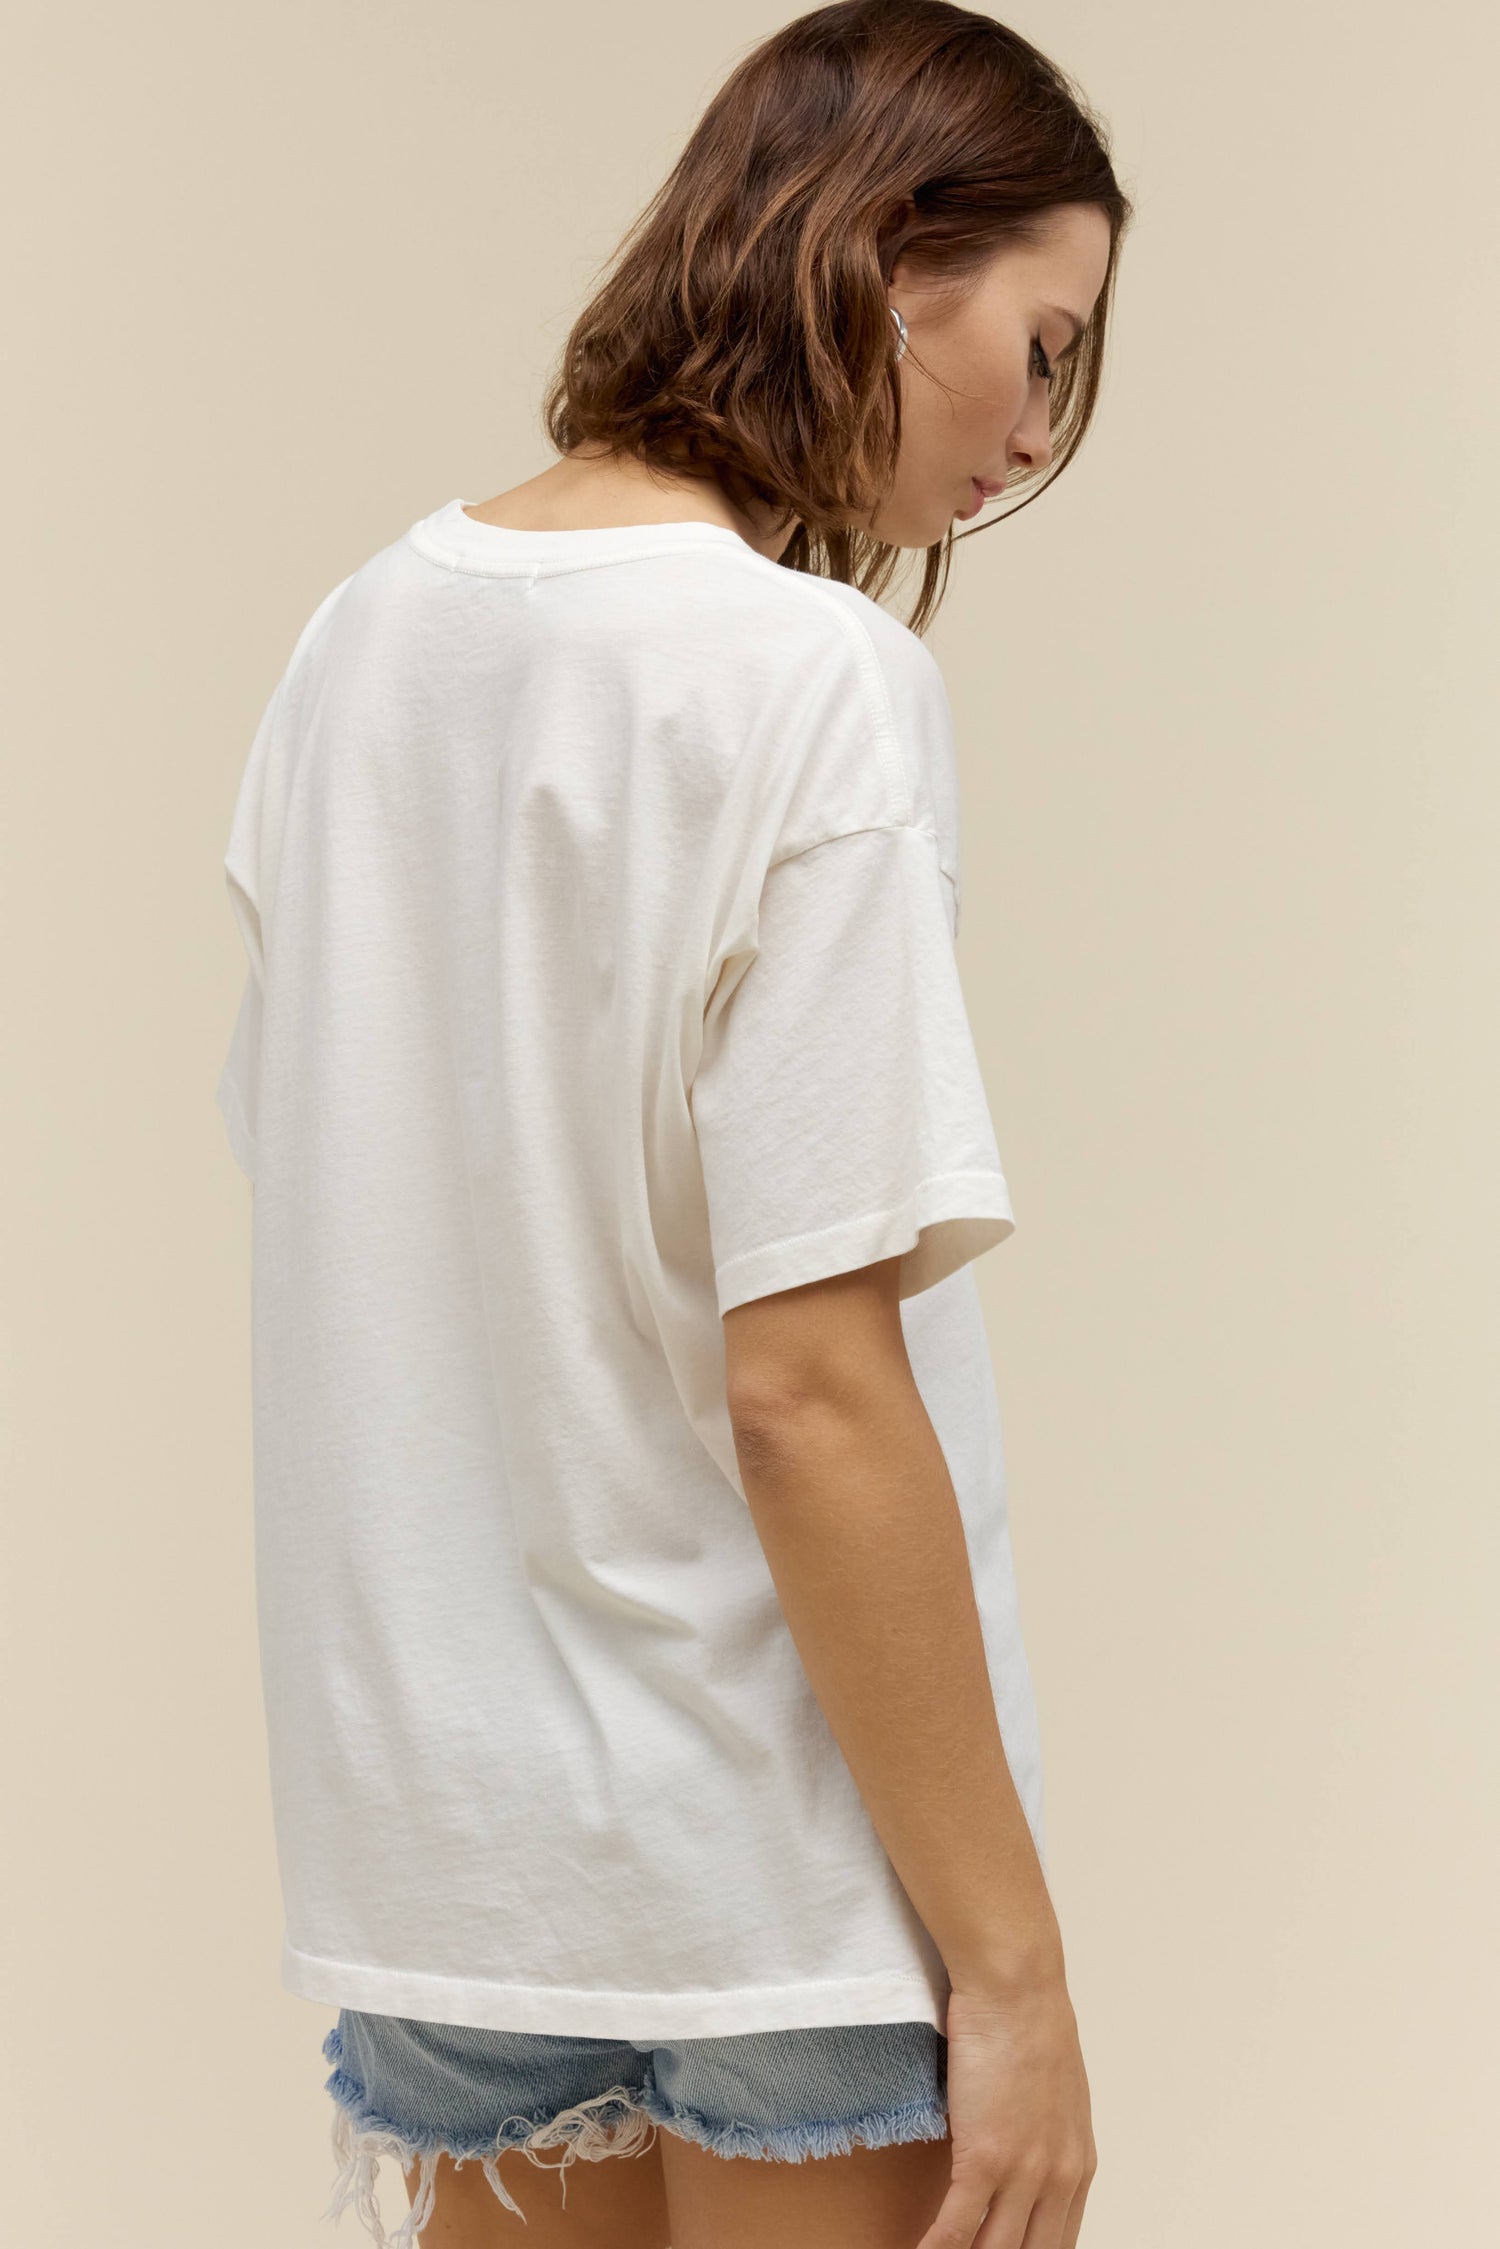 A model featuring a white tee with a graphic  design and stamped with 'Beastie Boys'.